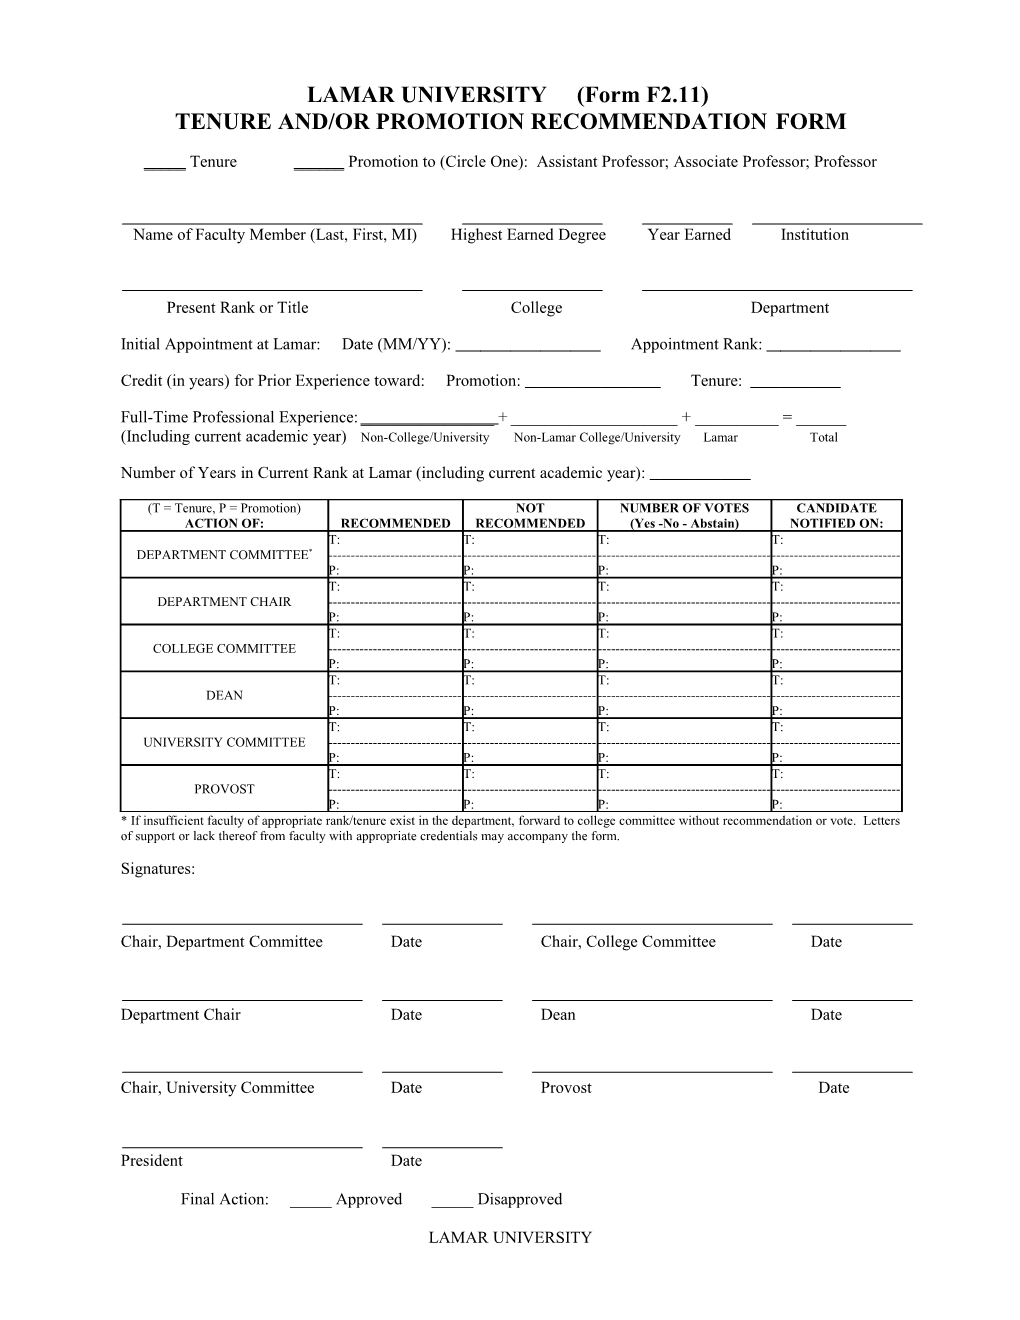 Tenure And/Or Promotion Recommendation Form